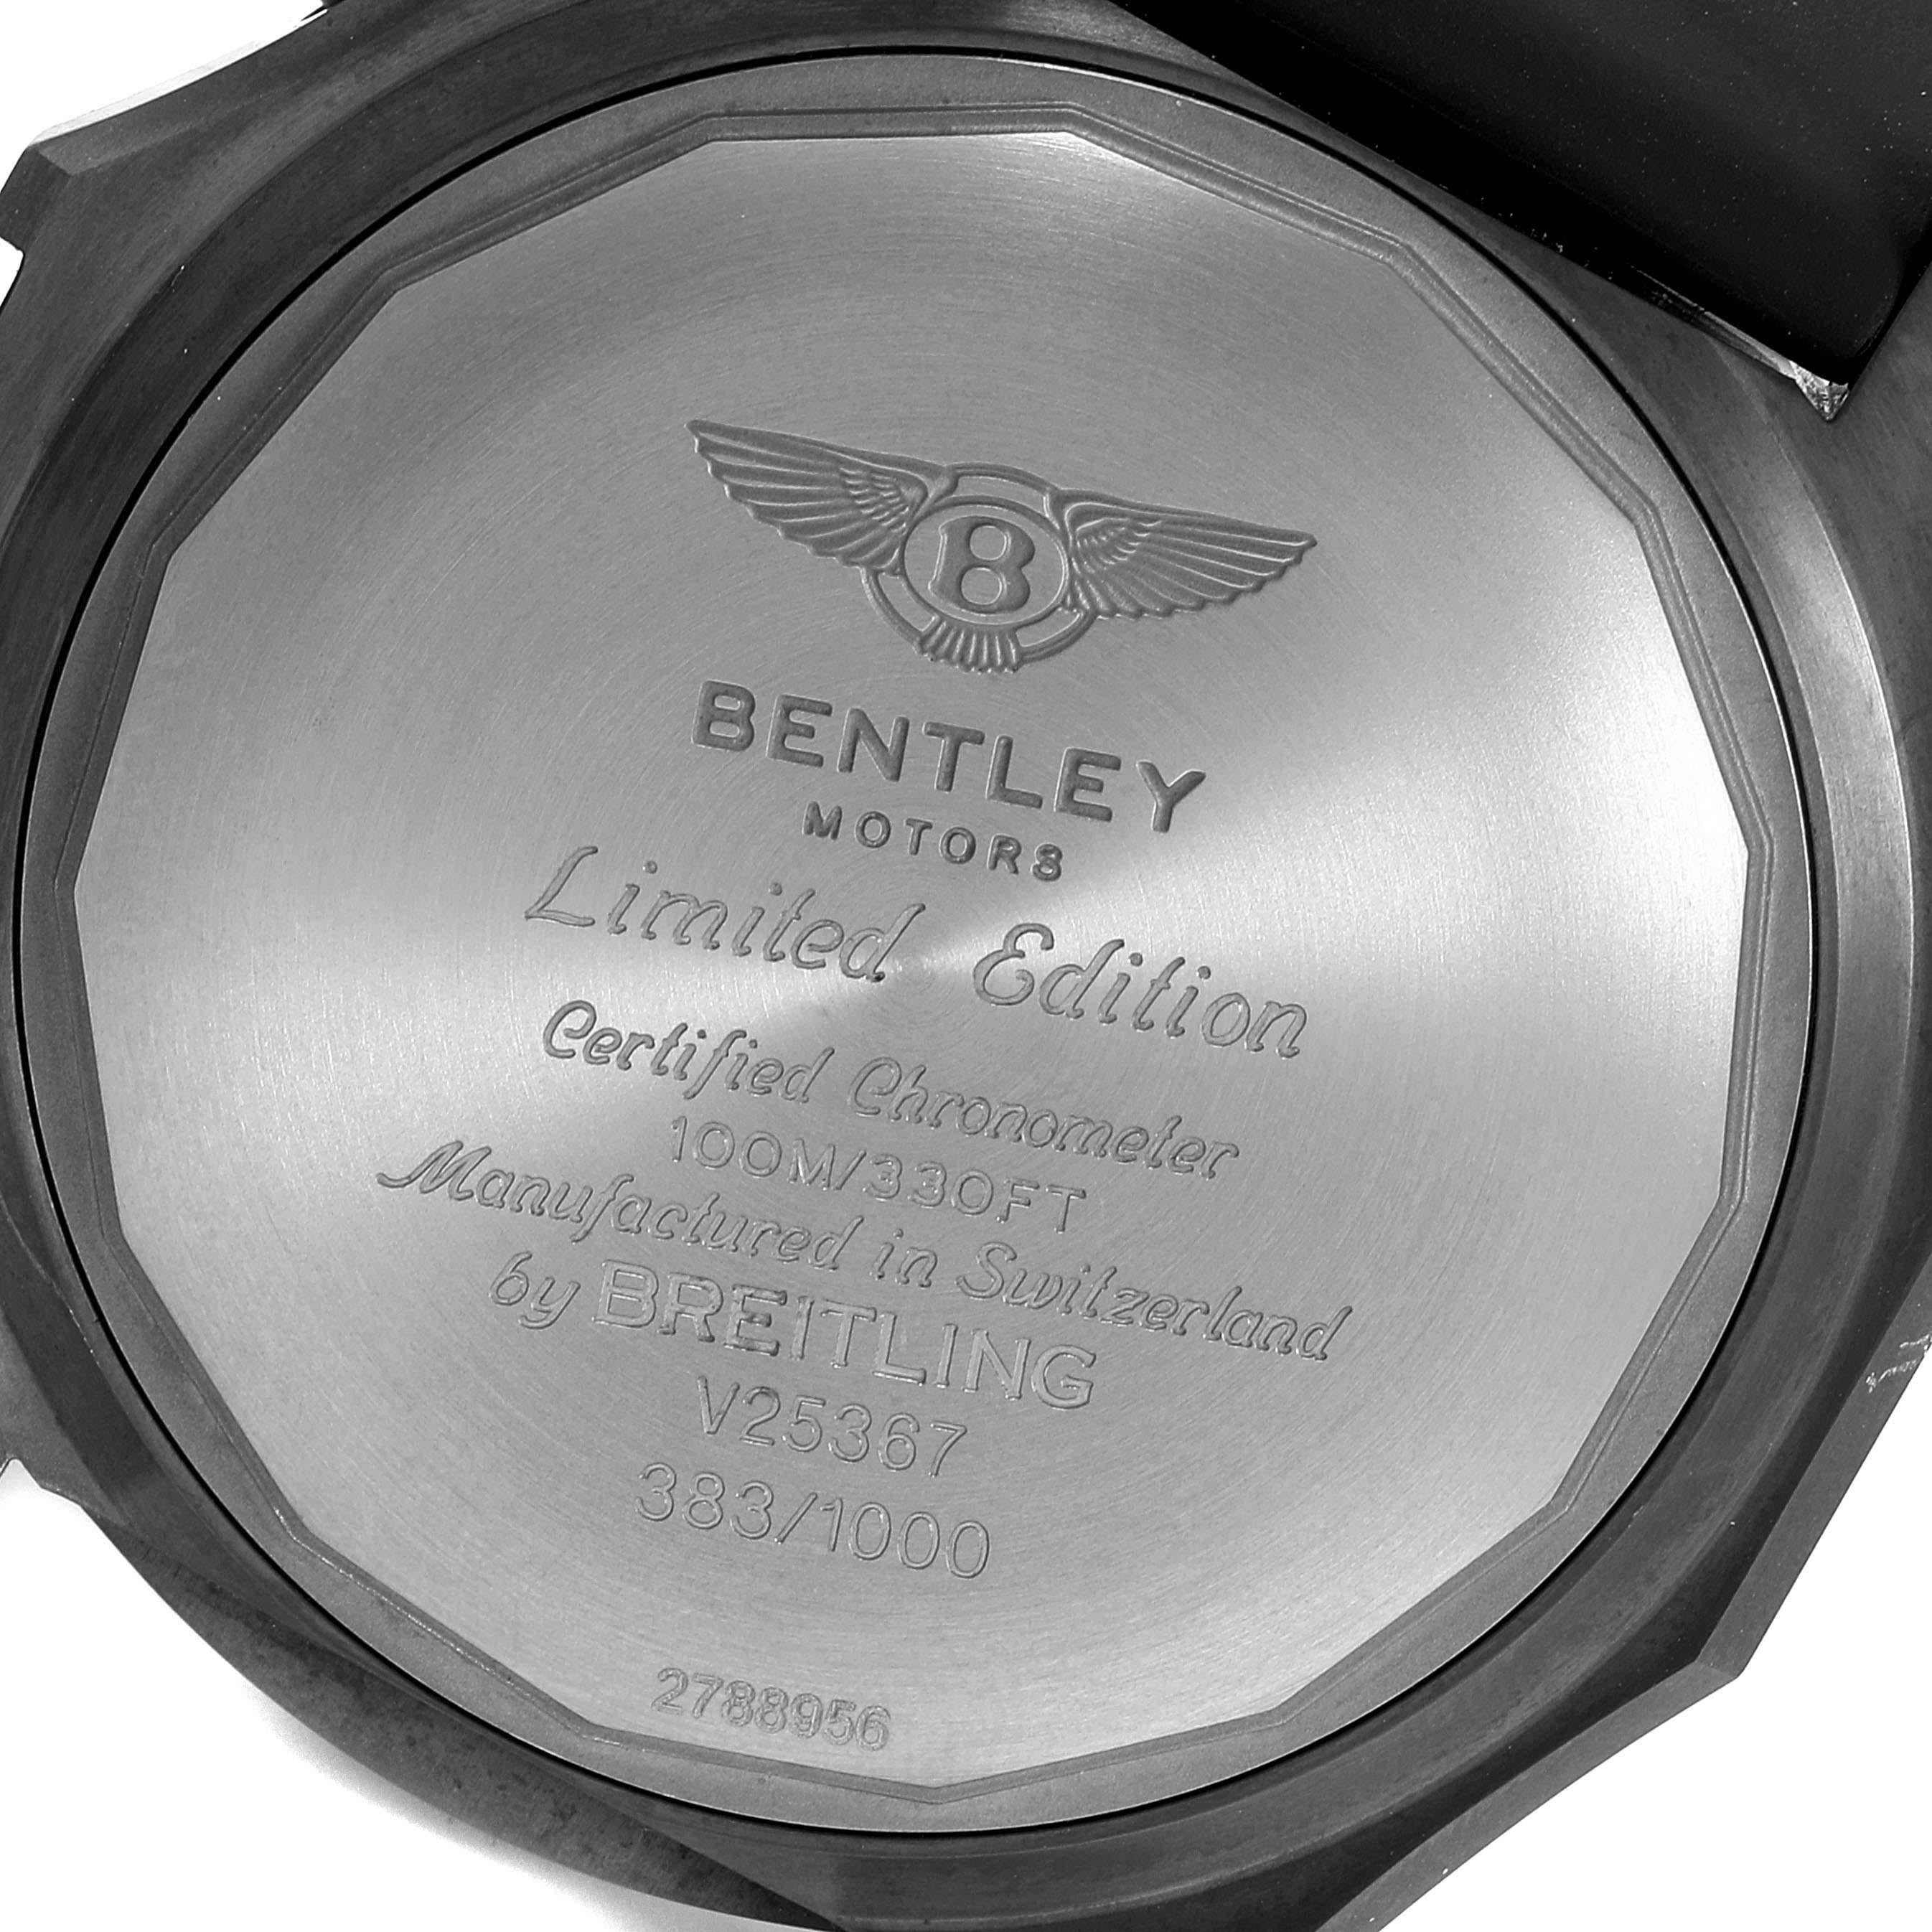 Men's Breitling Bentley Light Body Midnight Carbon Rubber Strap LE Watch V25367